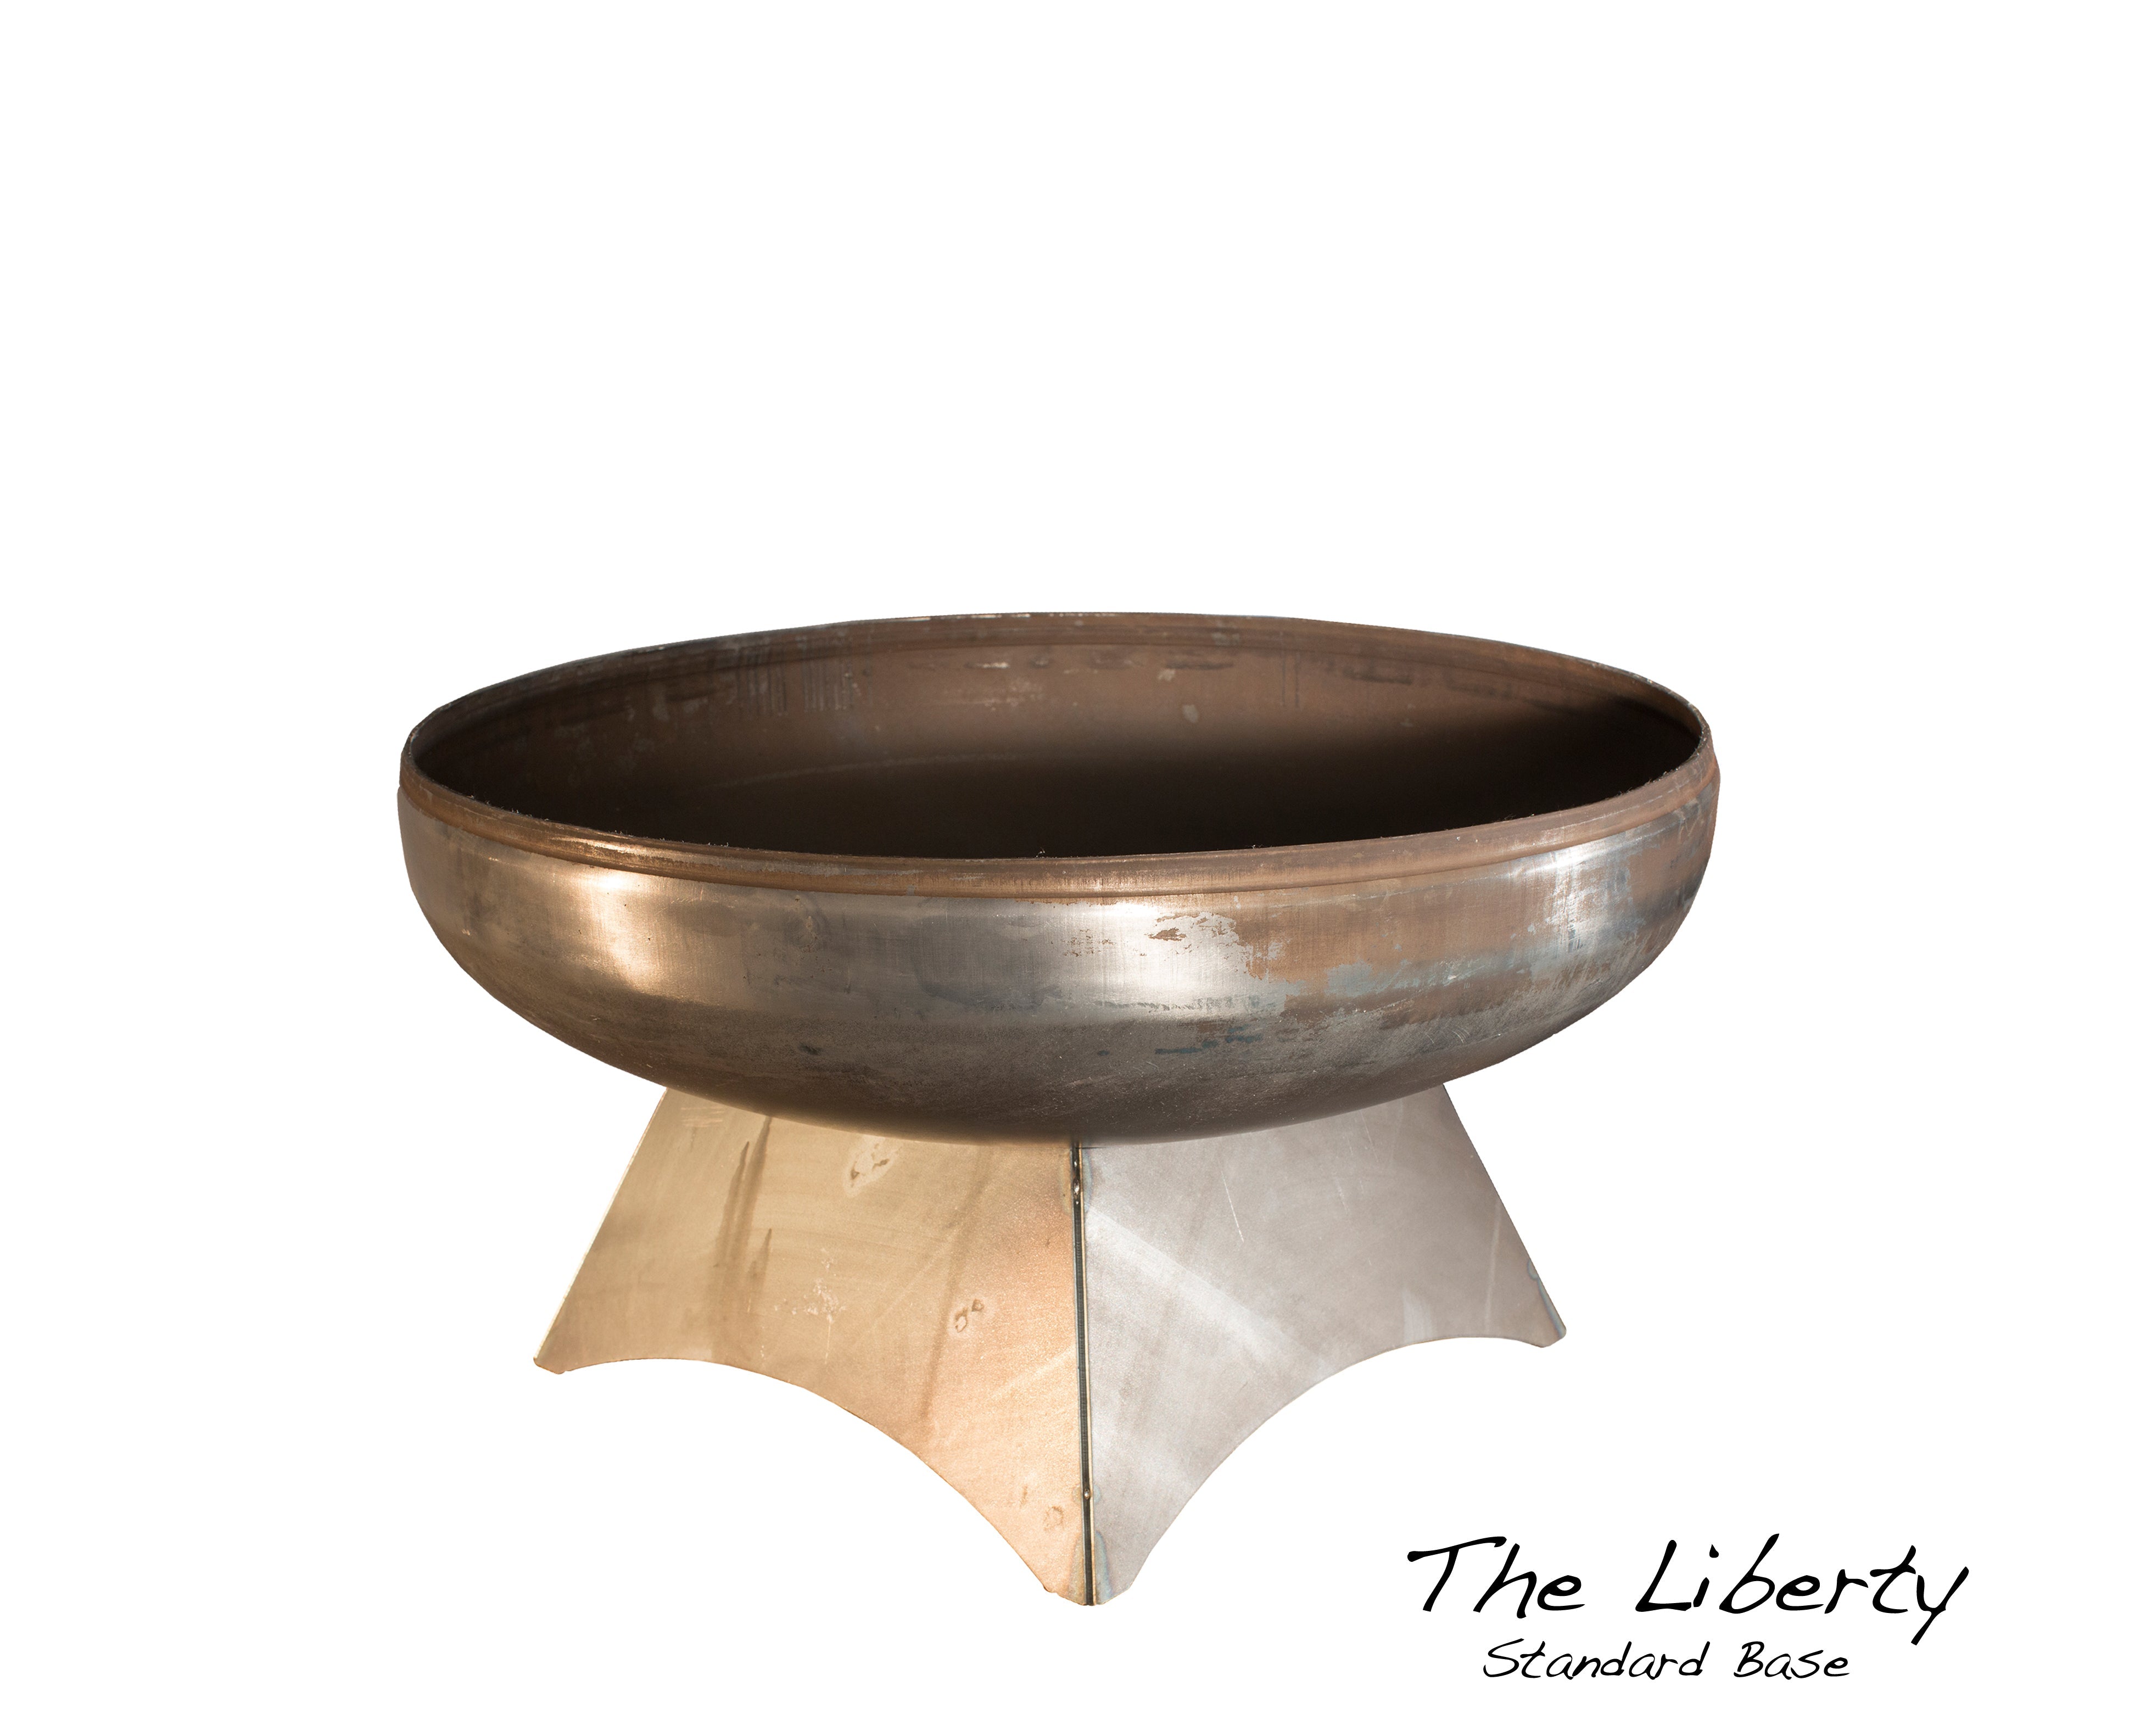 Ohio Flame Liberty Fire Pit with Standard Base- Side View